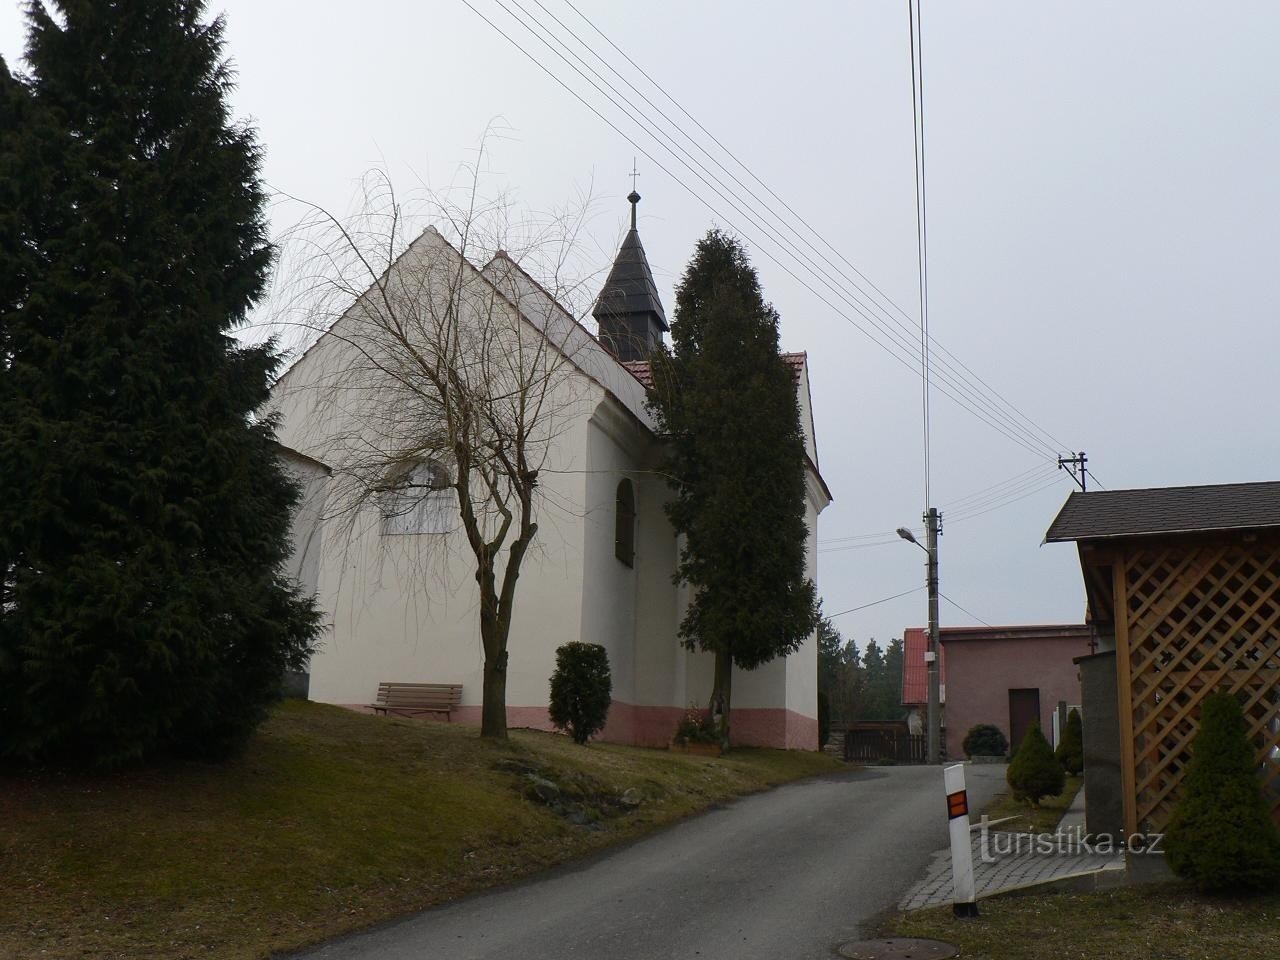 Kladruby, chapel from the east